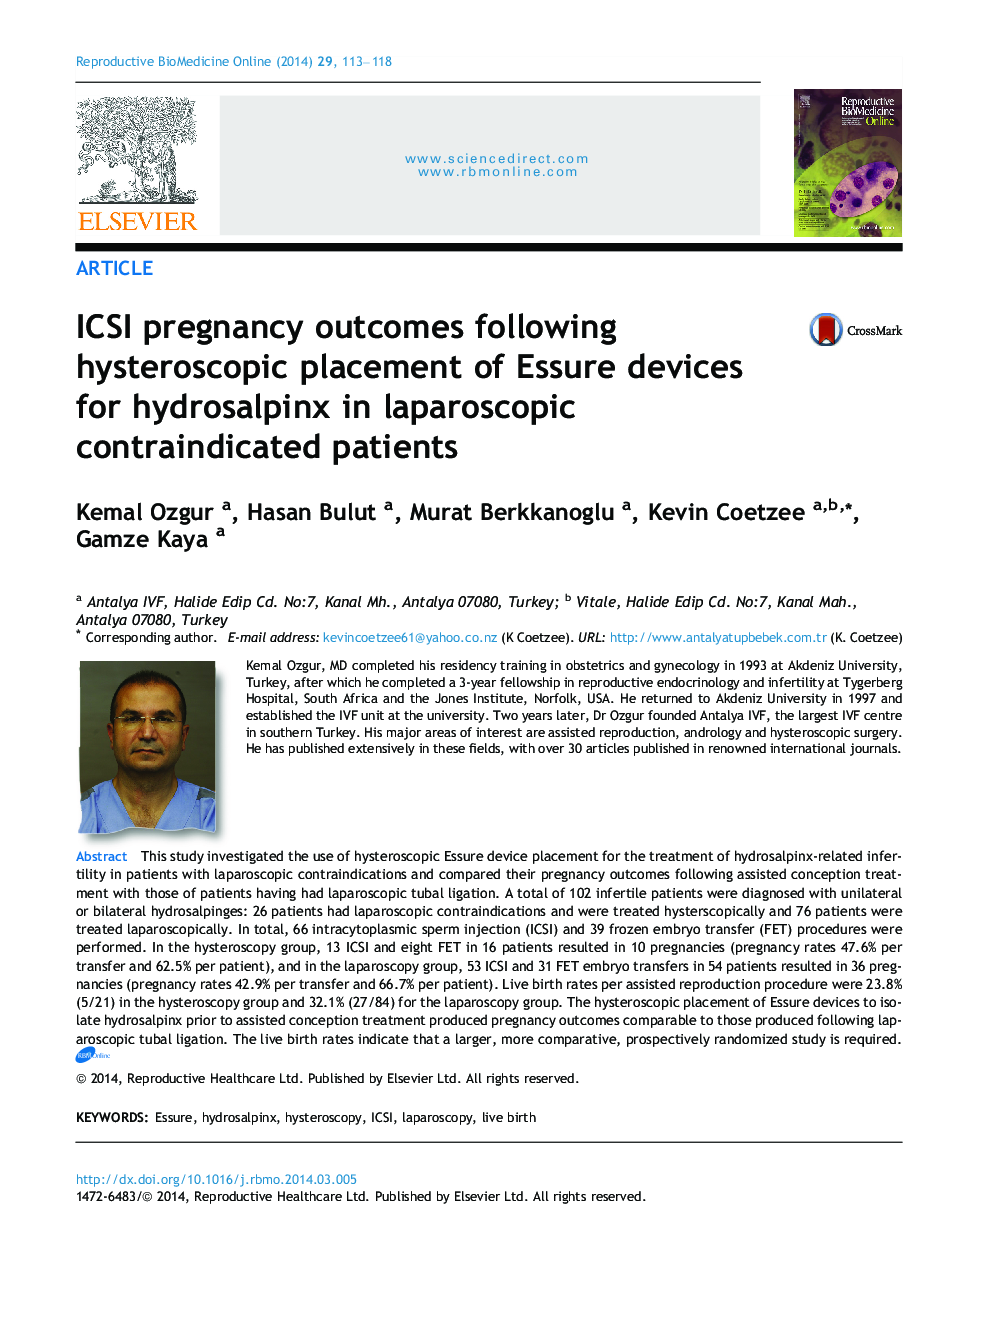 ICSI pregnancy outcomes following hysteroscopic placement of Essure devices for hydrosalpinx in laparoscopic contraindicated patients 